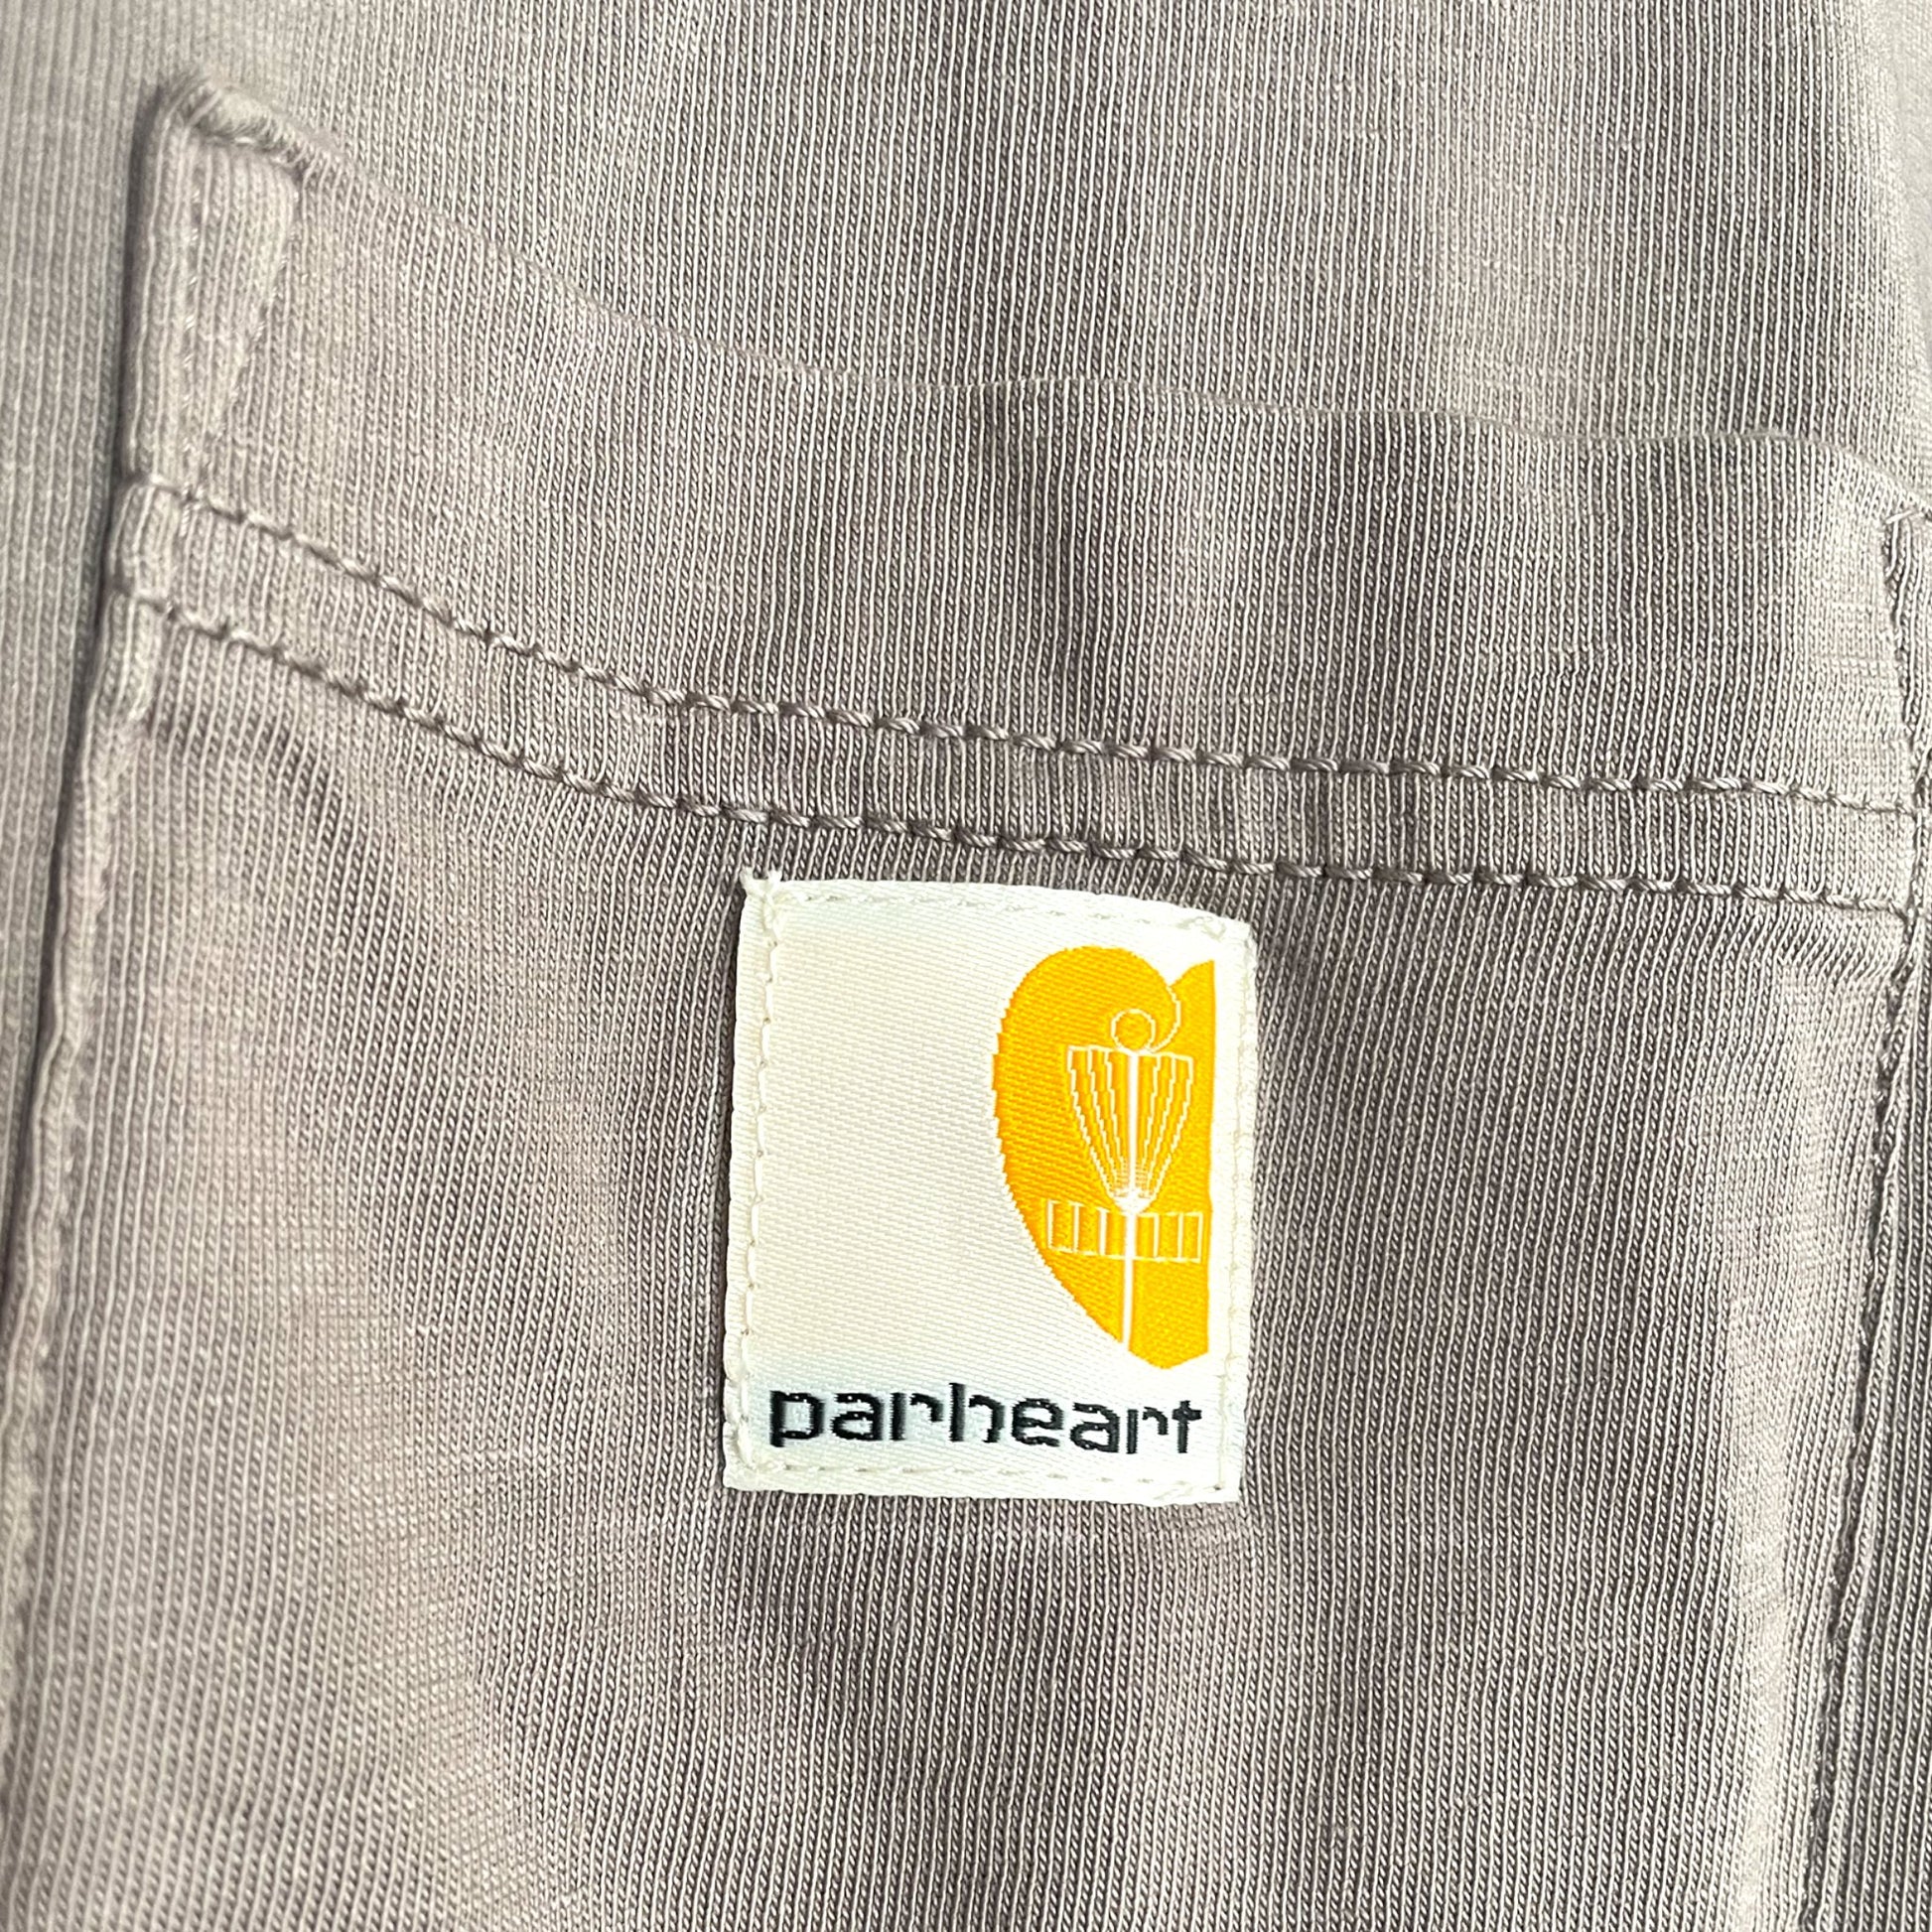 Perks and Re-creation Parheart Pocket Tee | Brown Disc Golf